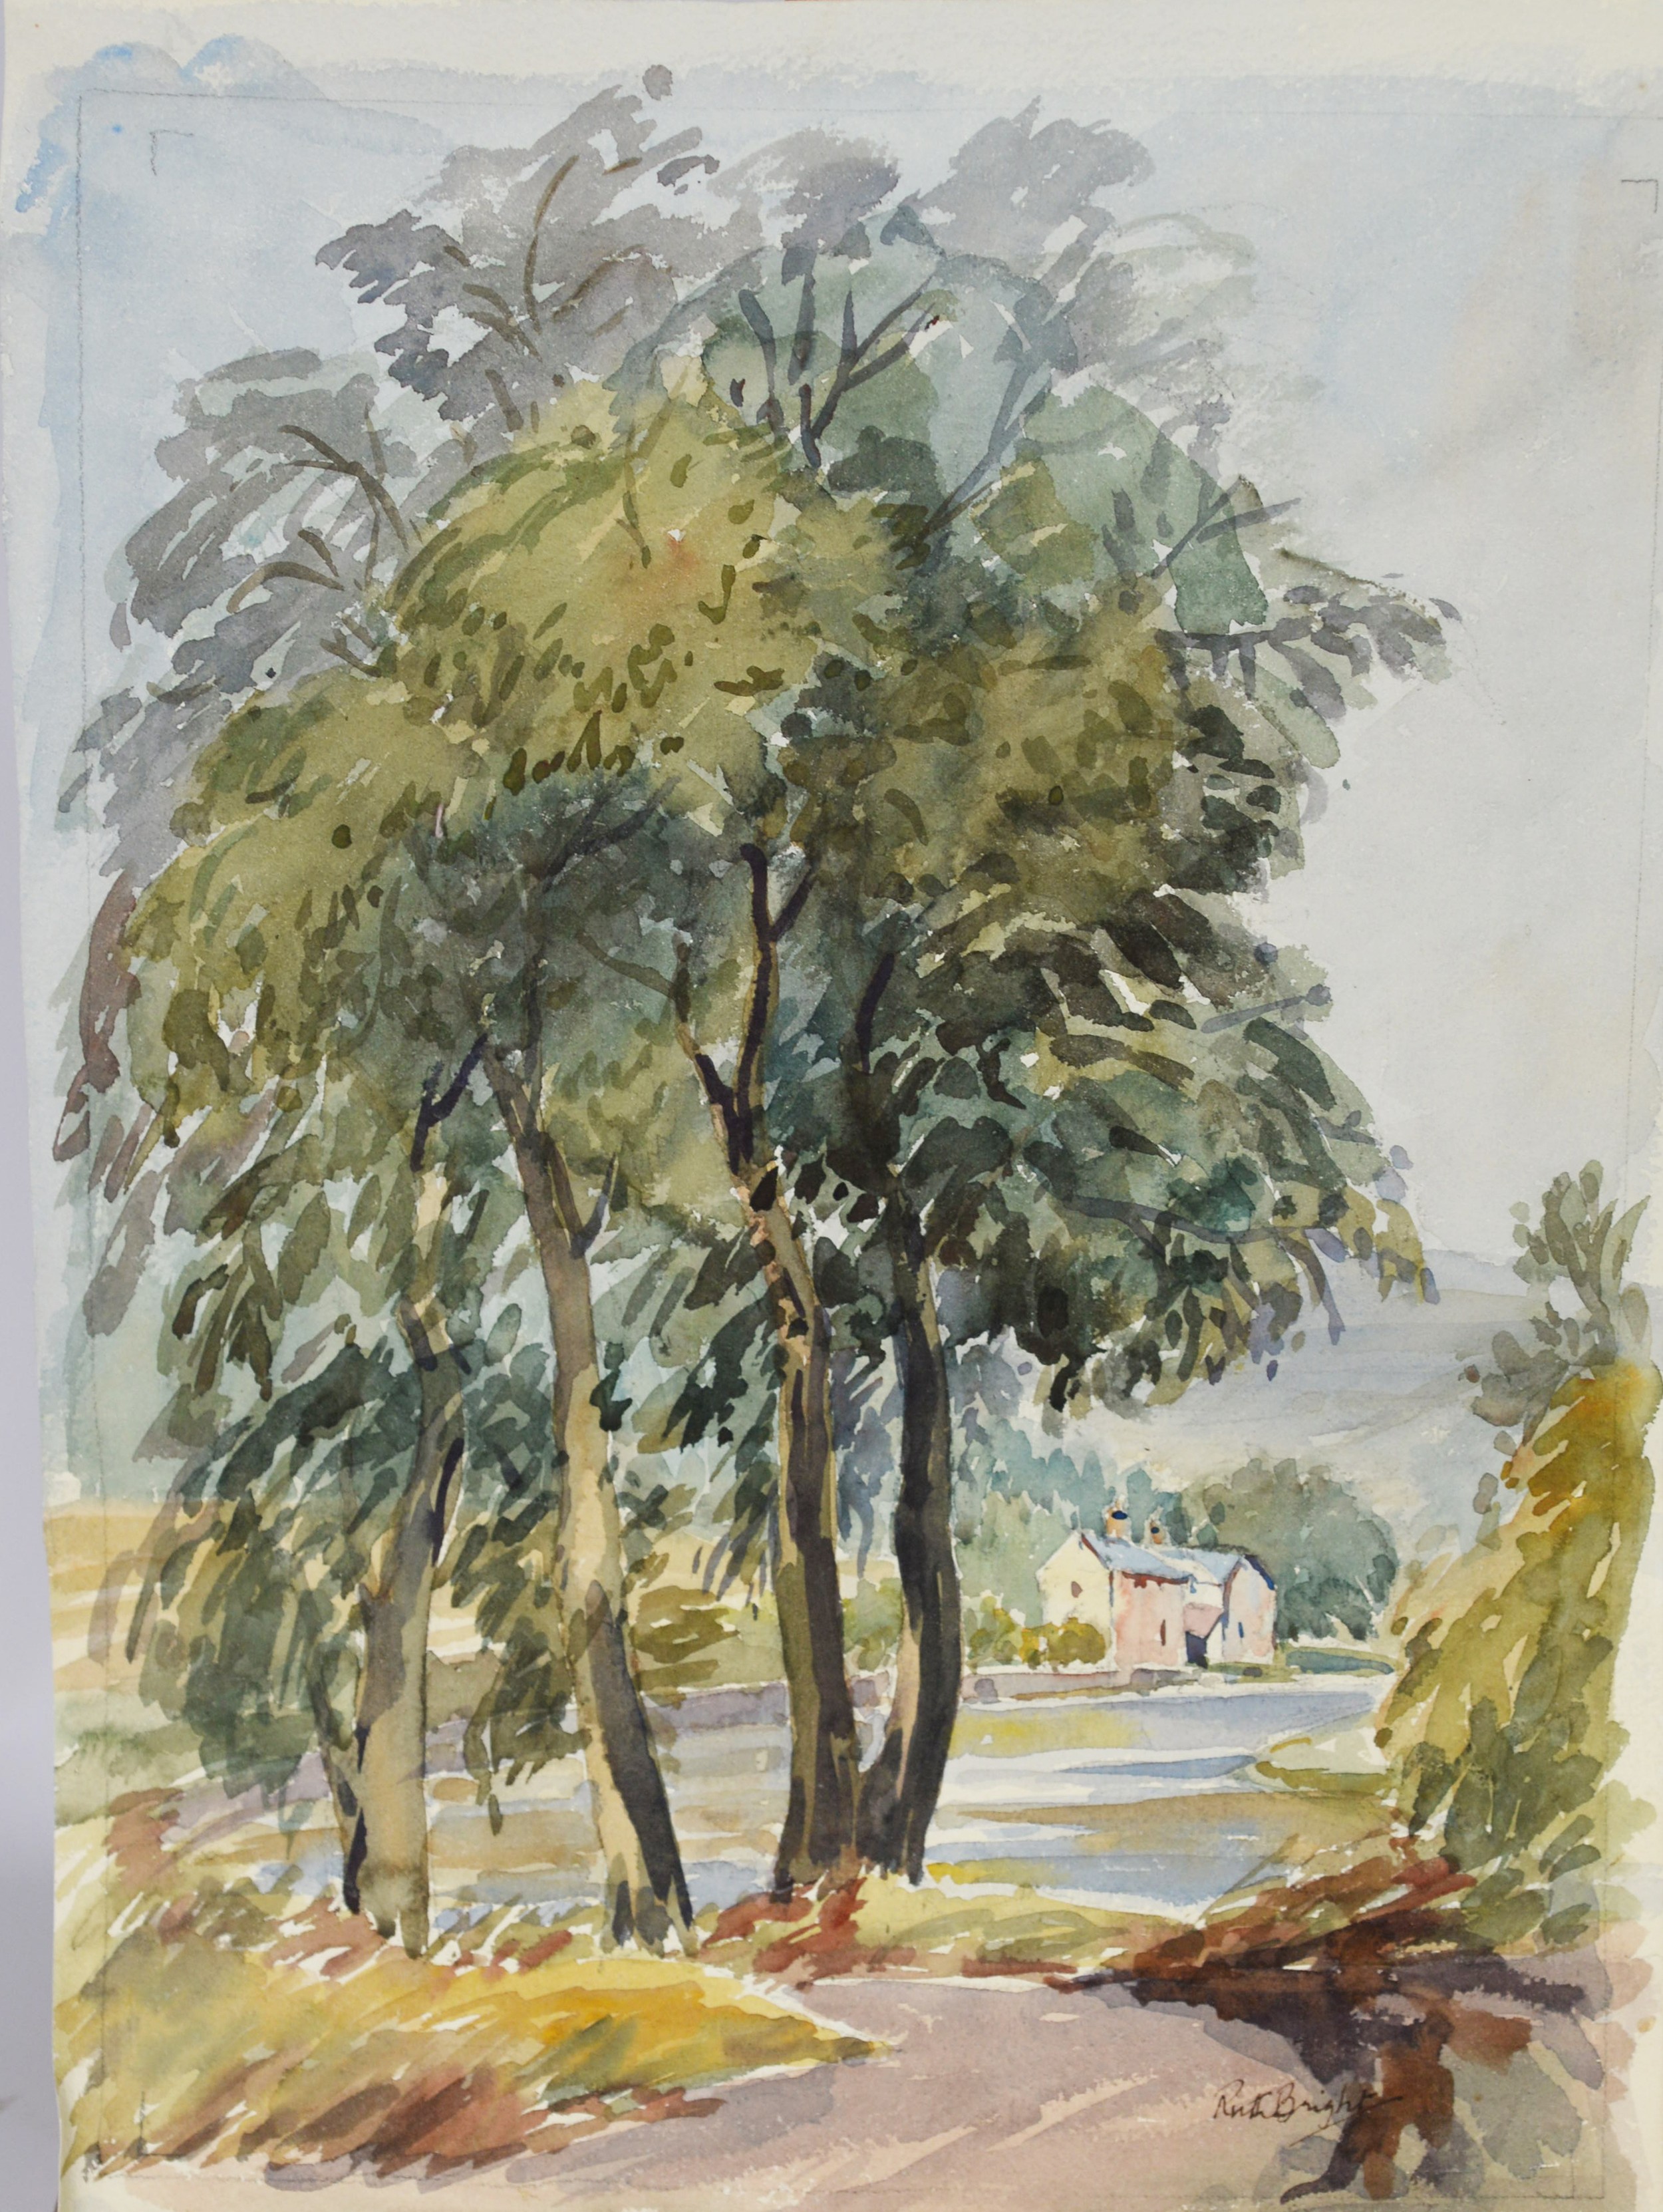 RUTH BRIGHT (20th CENTURY), IN EXCESS OF 100 UNFRAMED WATERCOLOUR DRAWINGS, MOSTLY LANDSCAPE - Image 2 of 4